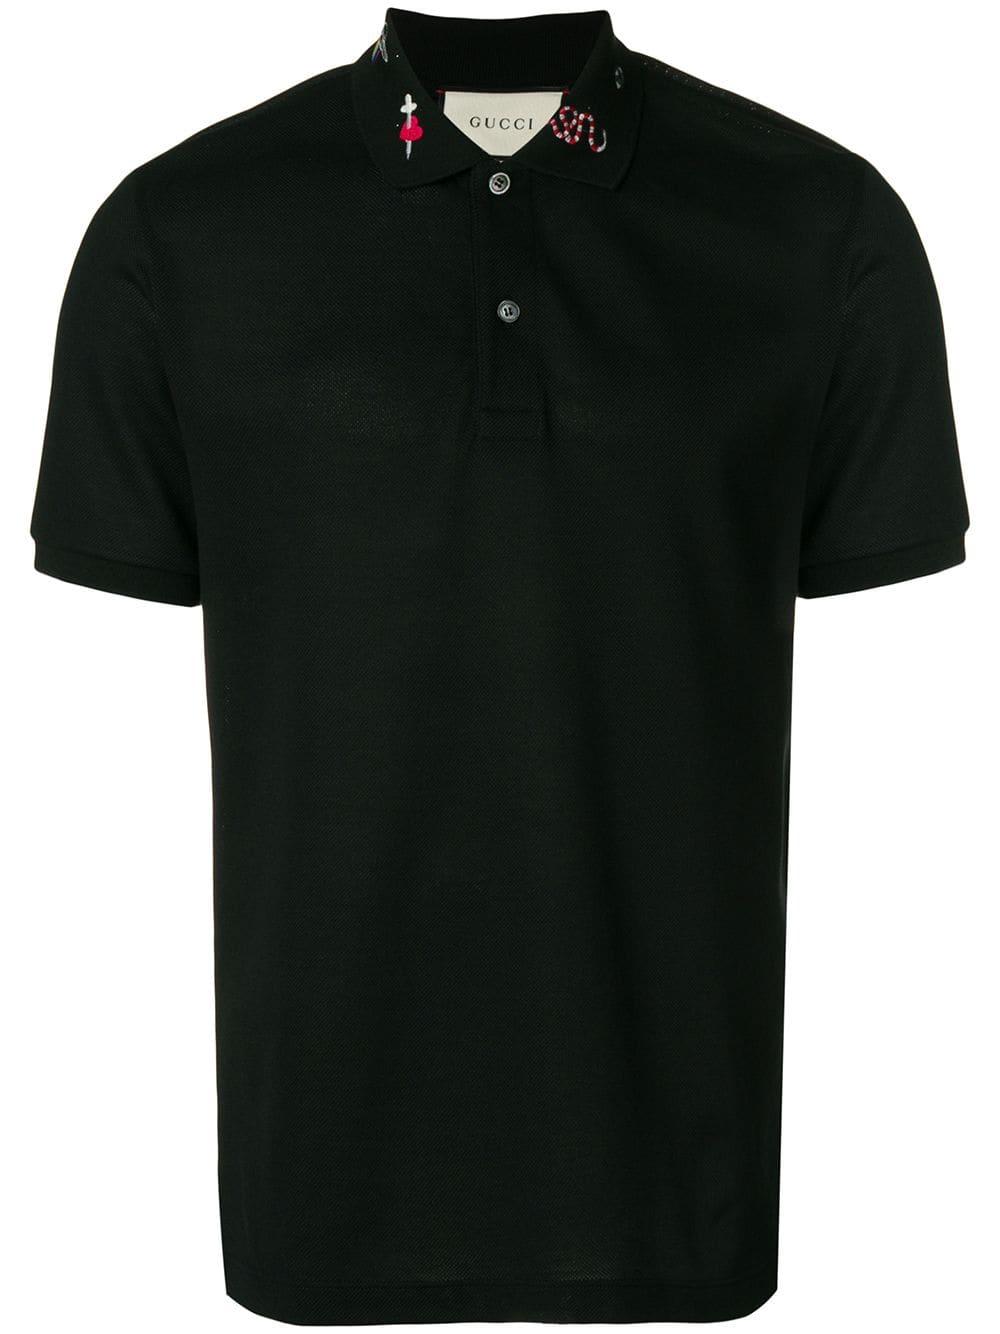 Gucci Cotton Embroidered Piqué Polo Shirt in Black for Men - Lyst